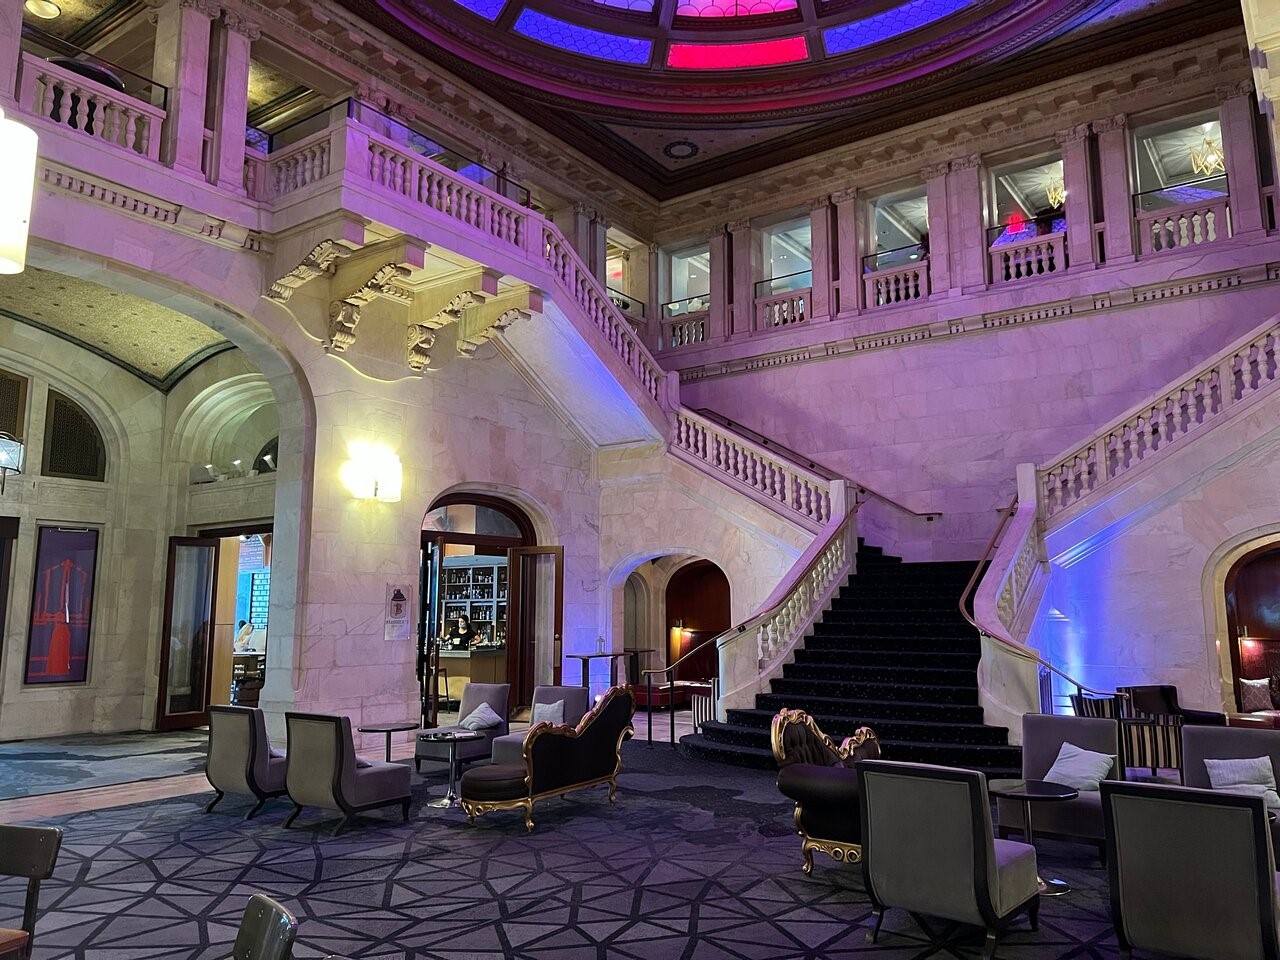 Inside lobby of theRenaissance